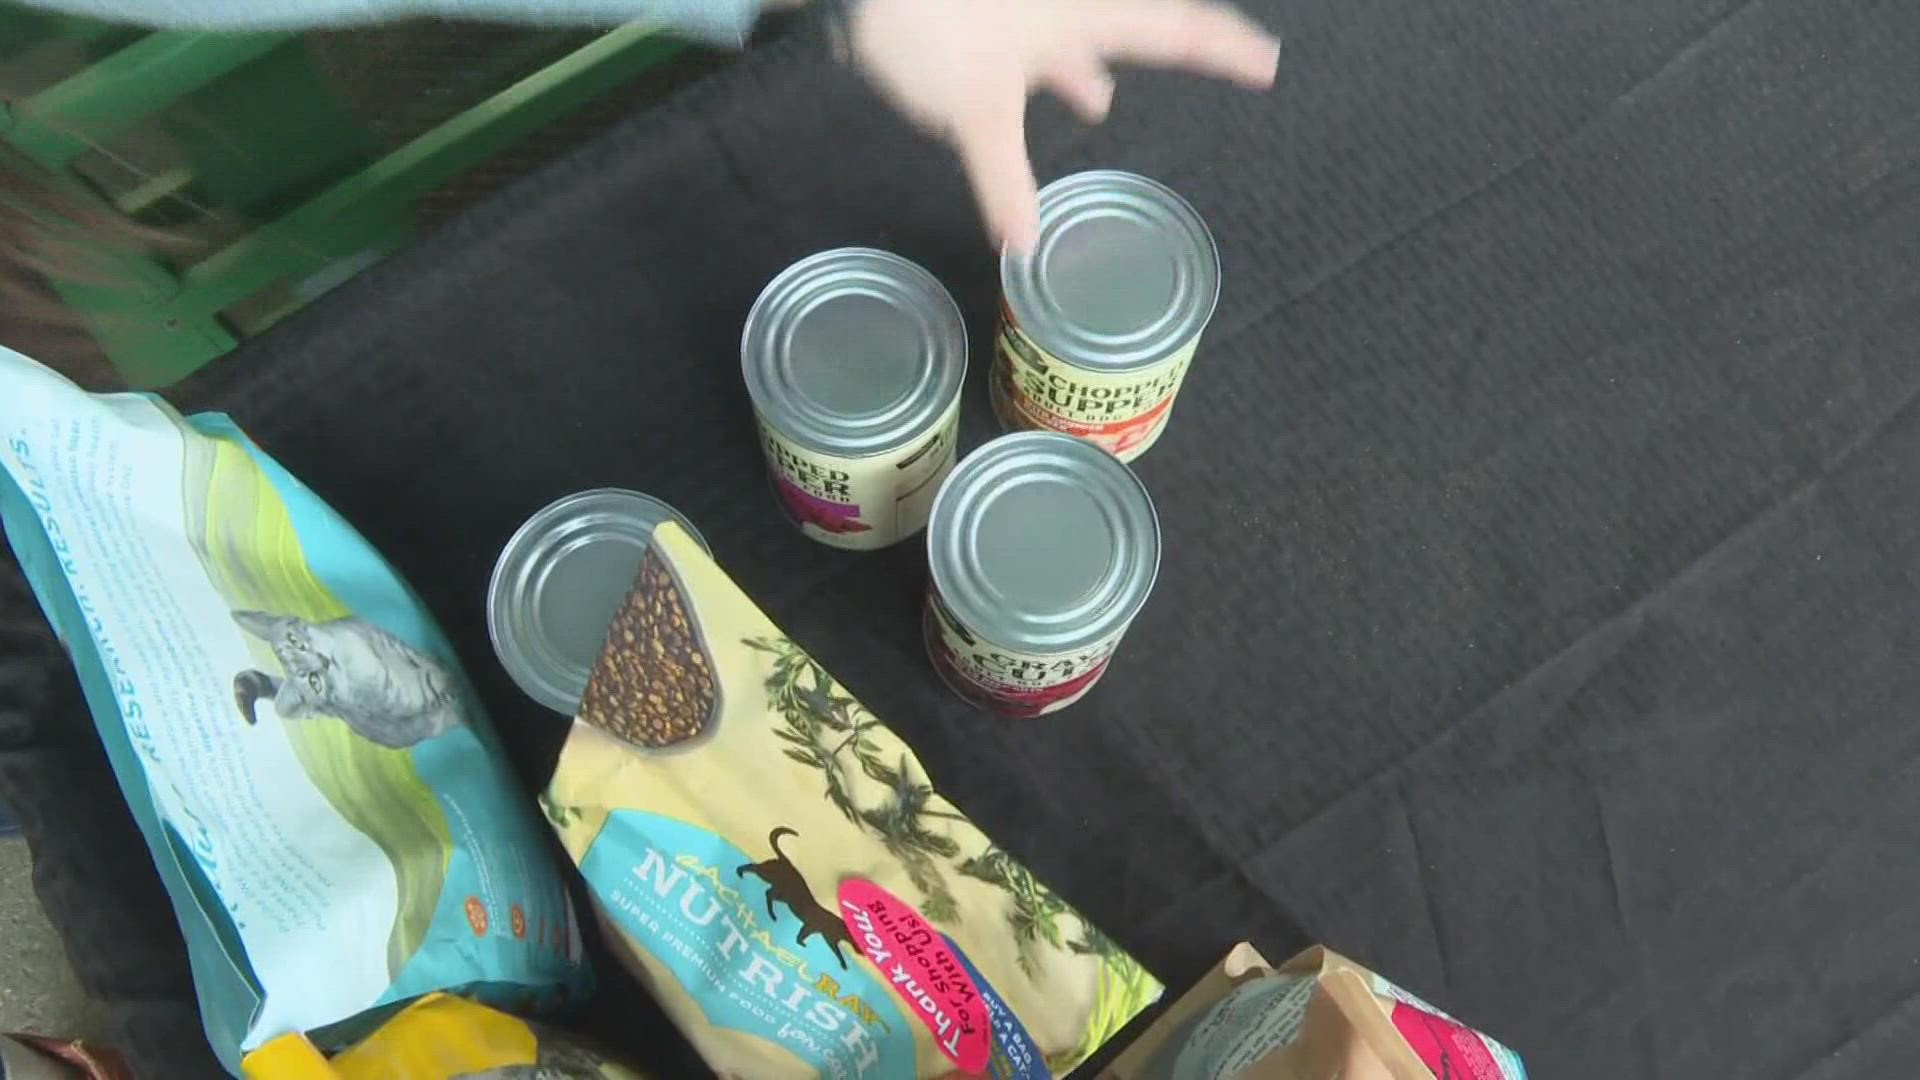 Fury Friends Food Bank is looking for pet food donations